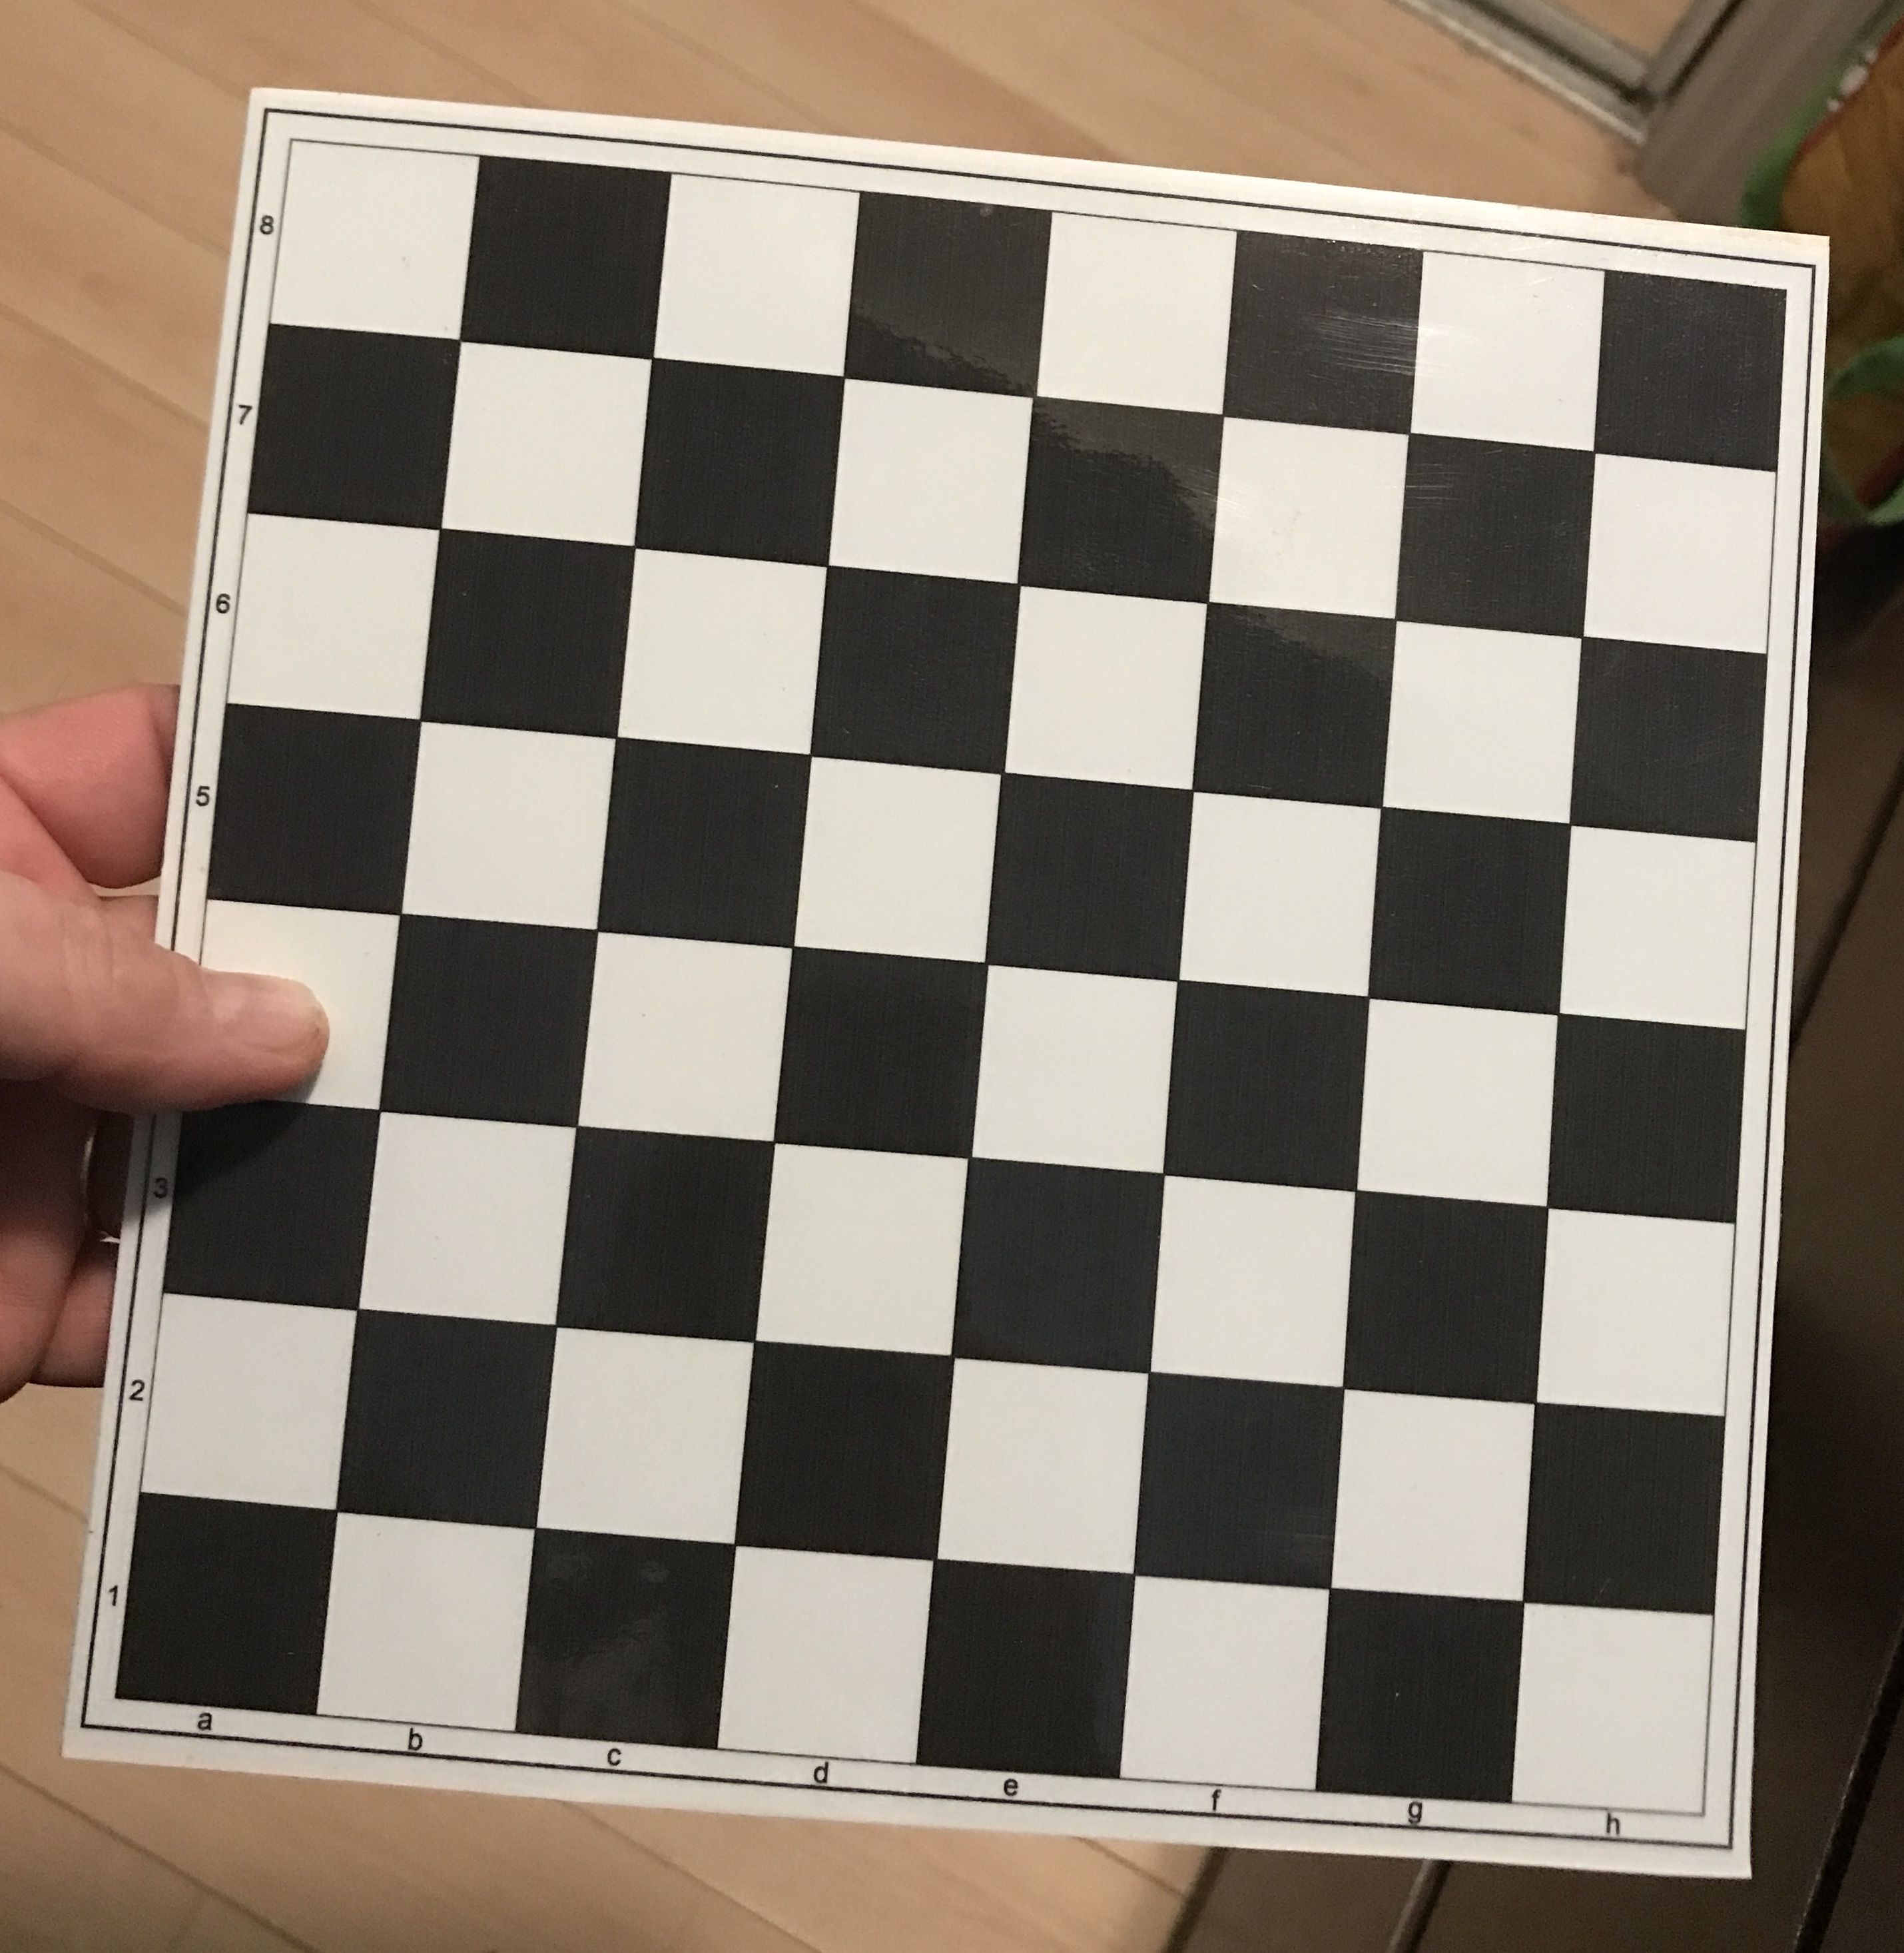 Rules of Chess - Print Paper Chess